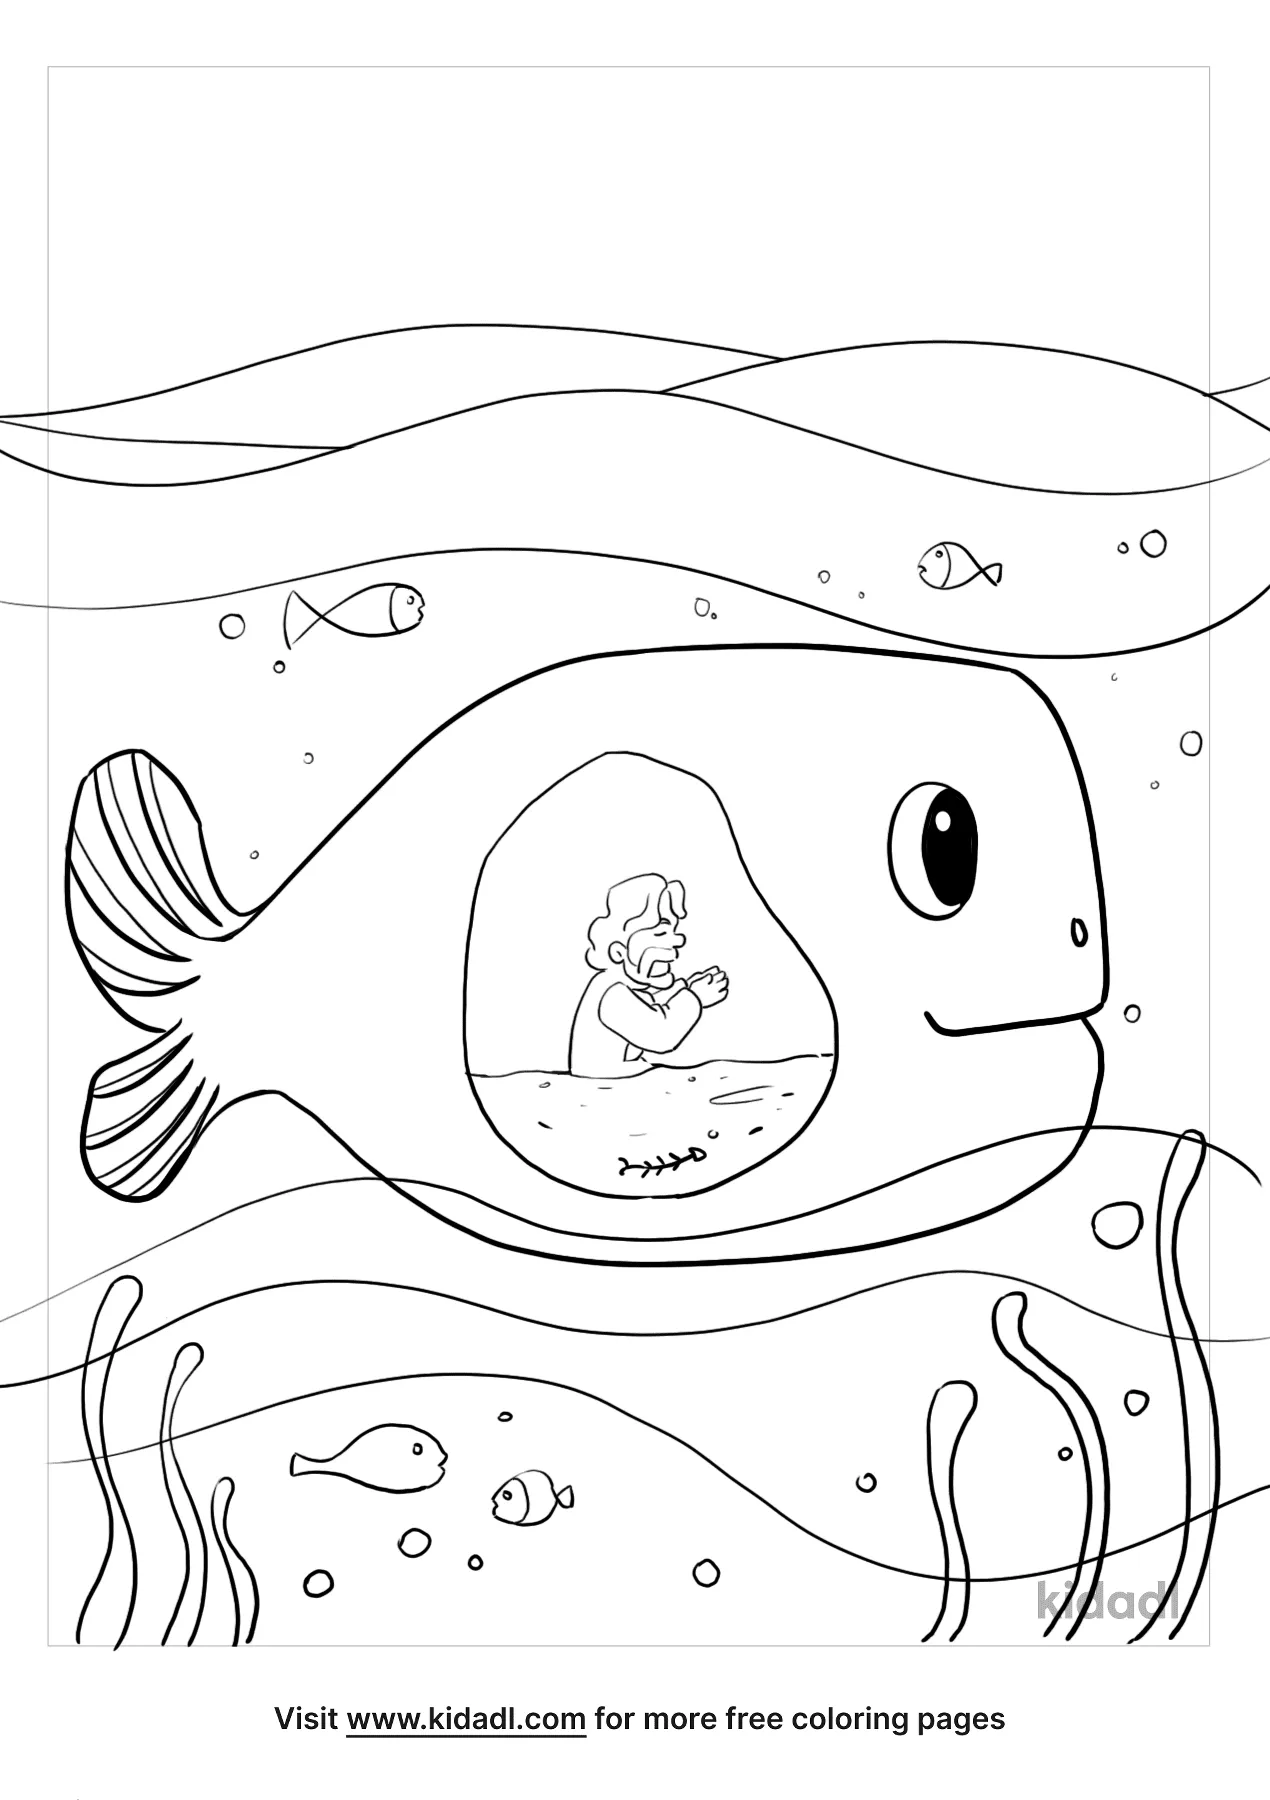 Jonah And The Whale Coloring Pages | Free Bible Coloring Pages | Kidadl